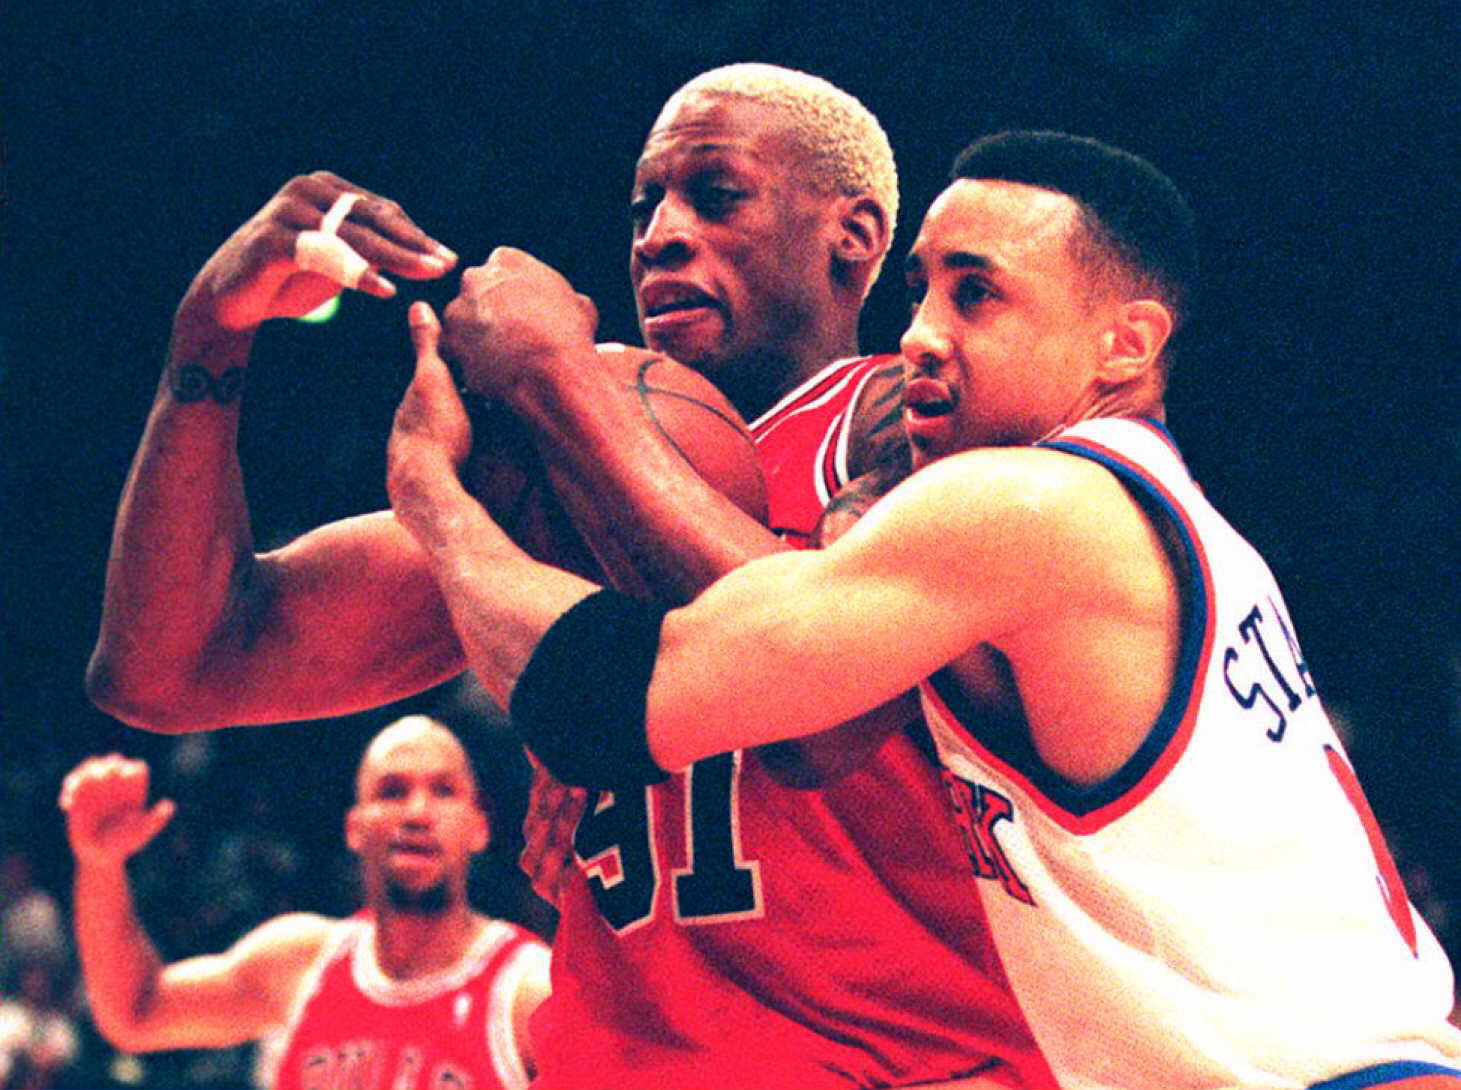 Dennis Rodman of the Chicago Bulls calls time out after his rebound.